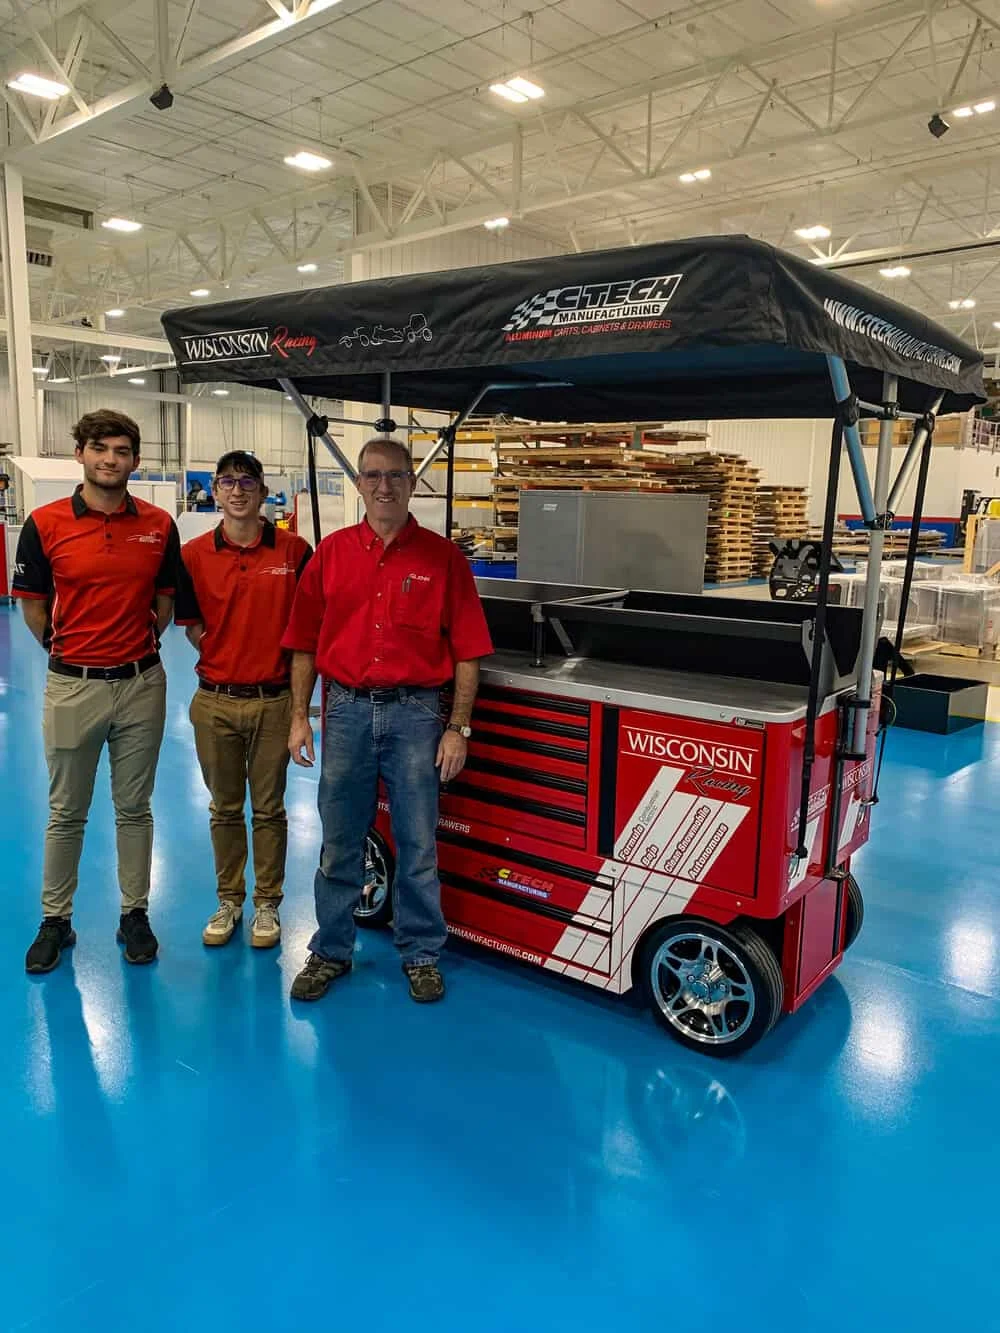 Pictured here is UW-Madison SAE program advisor ; Dr. Glenn Boyer, and team members at the CTech Manufacturing headquarters receiving their new Track Support Cart.